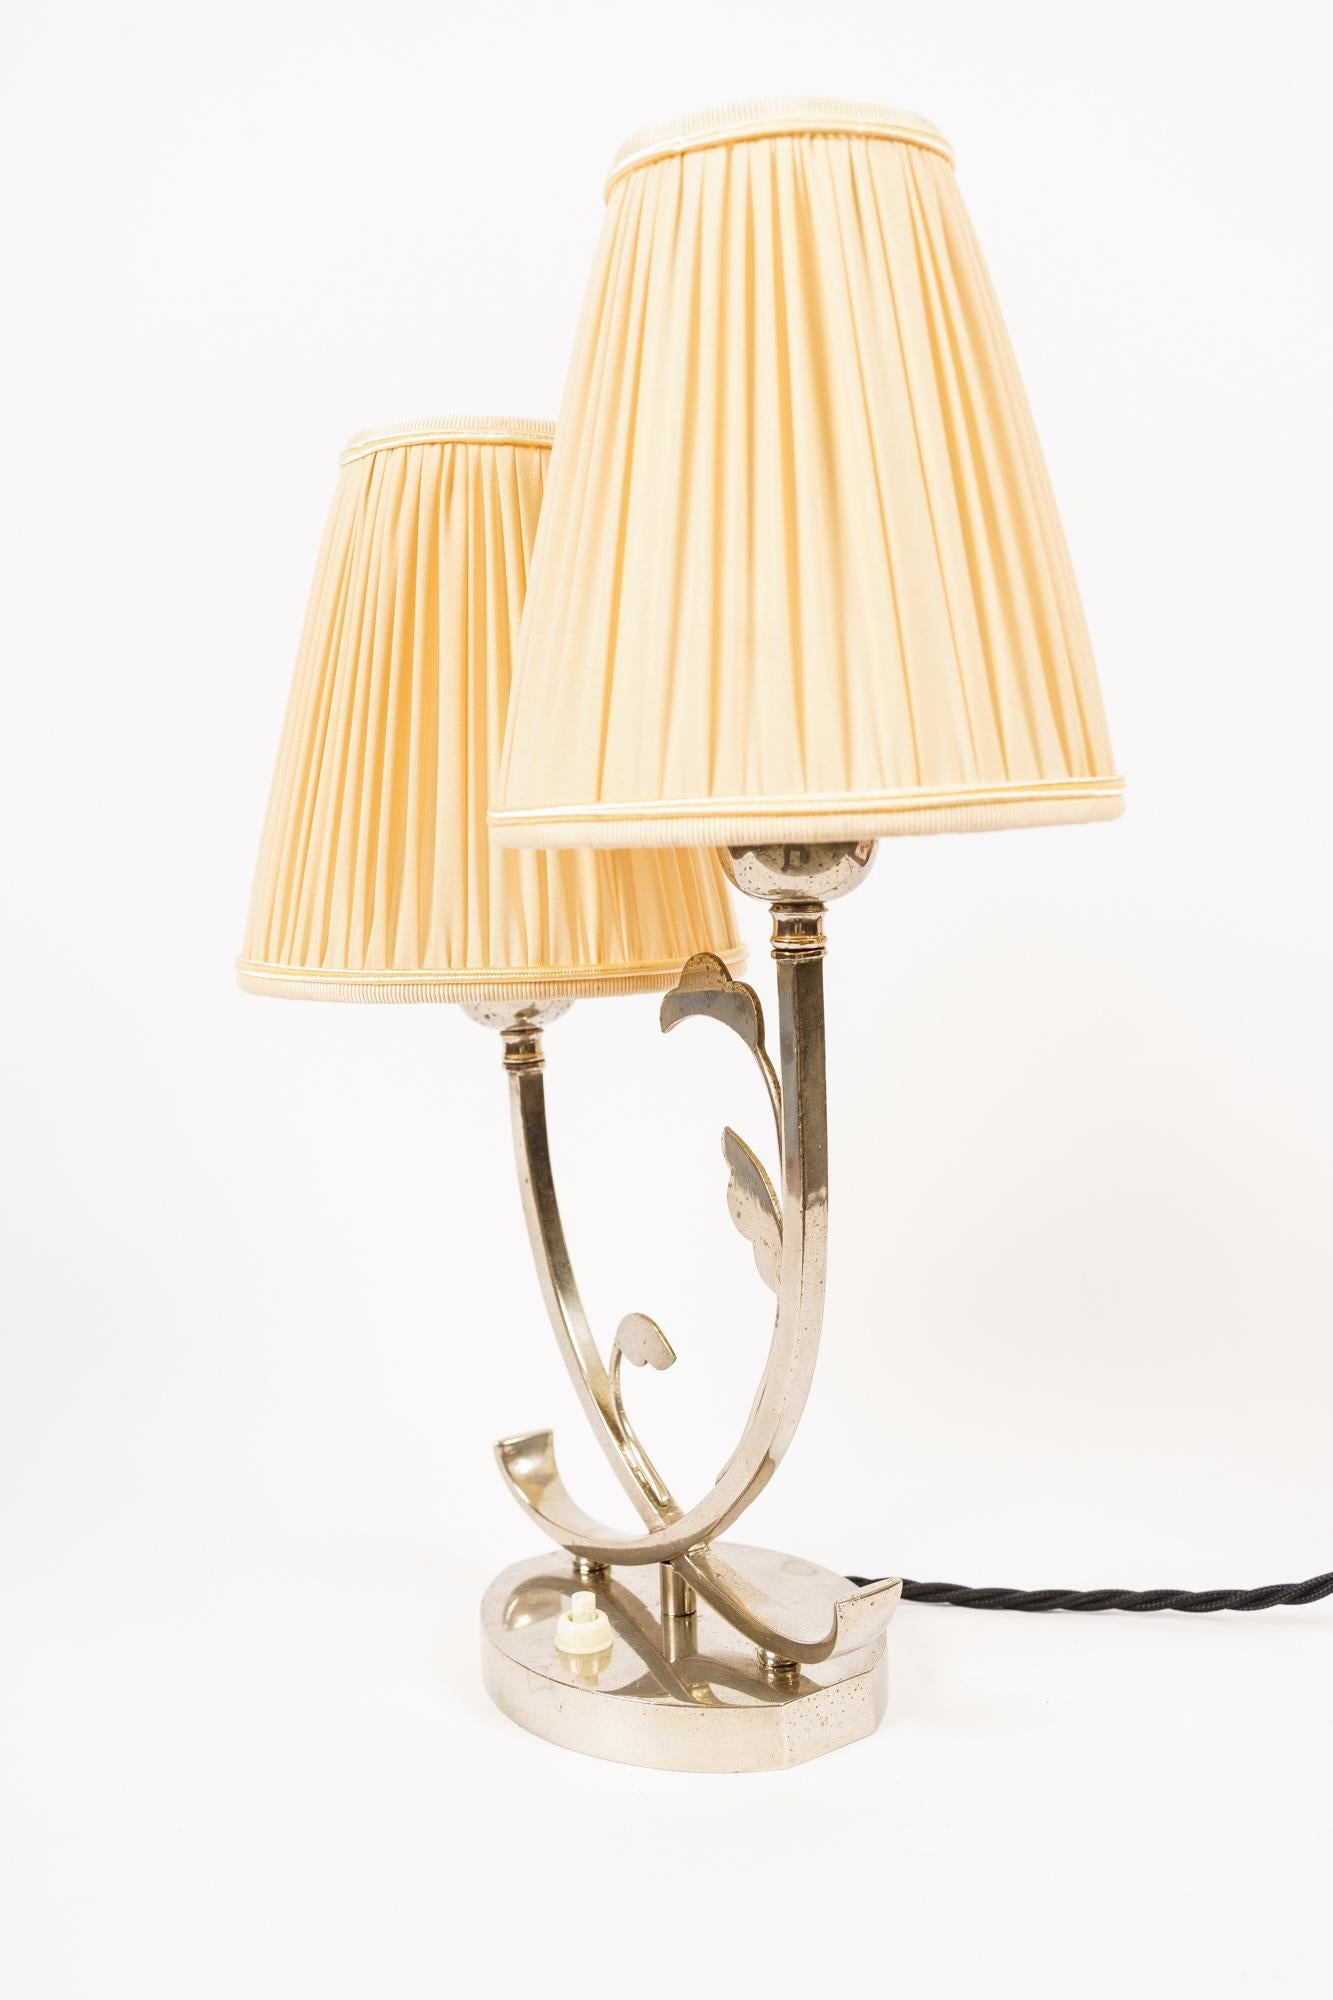 Brass Rare Art Deco Table Lamp with Fabric Shades Vienna Around 1920s For Sale